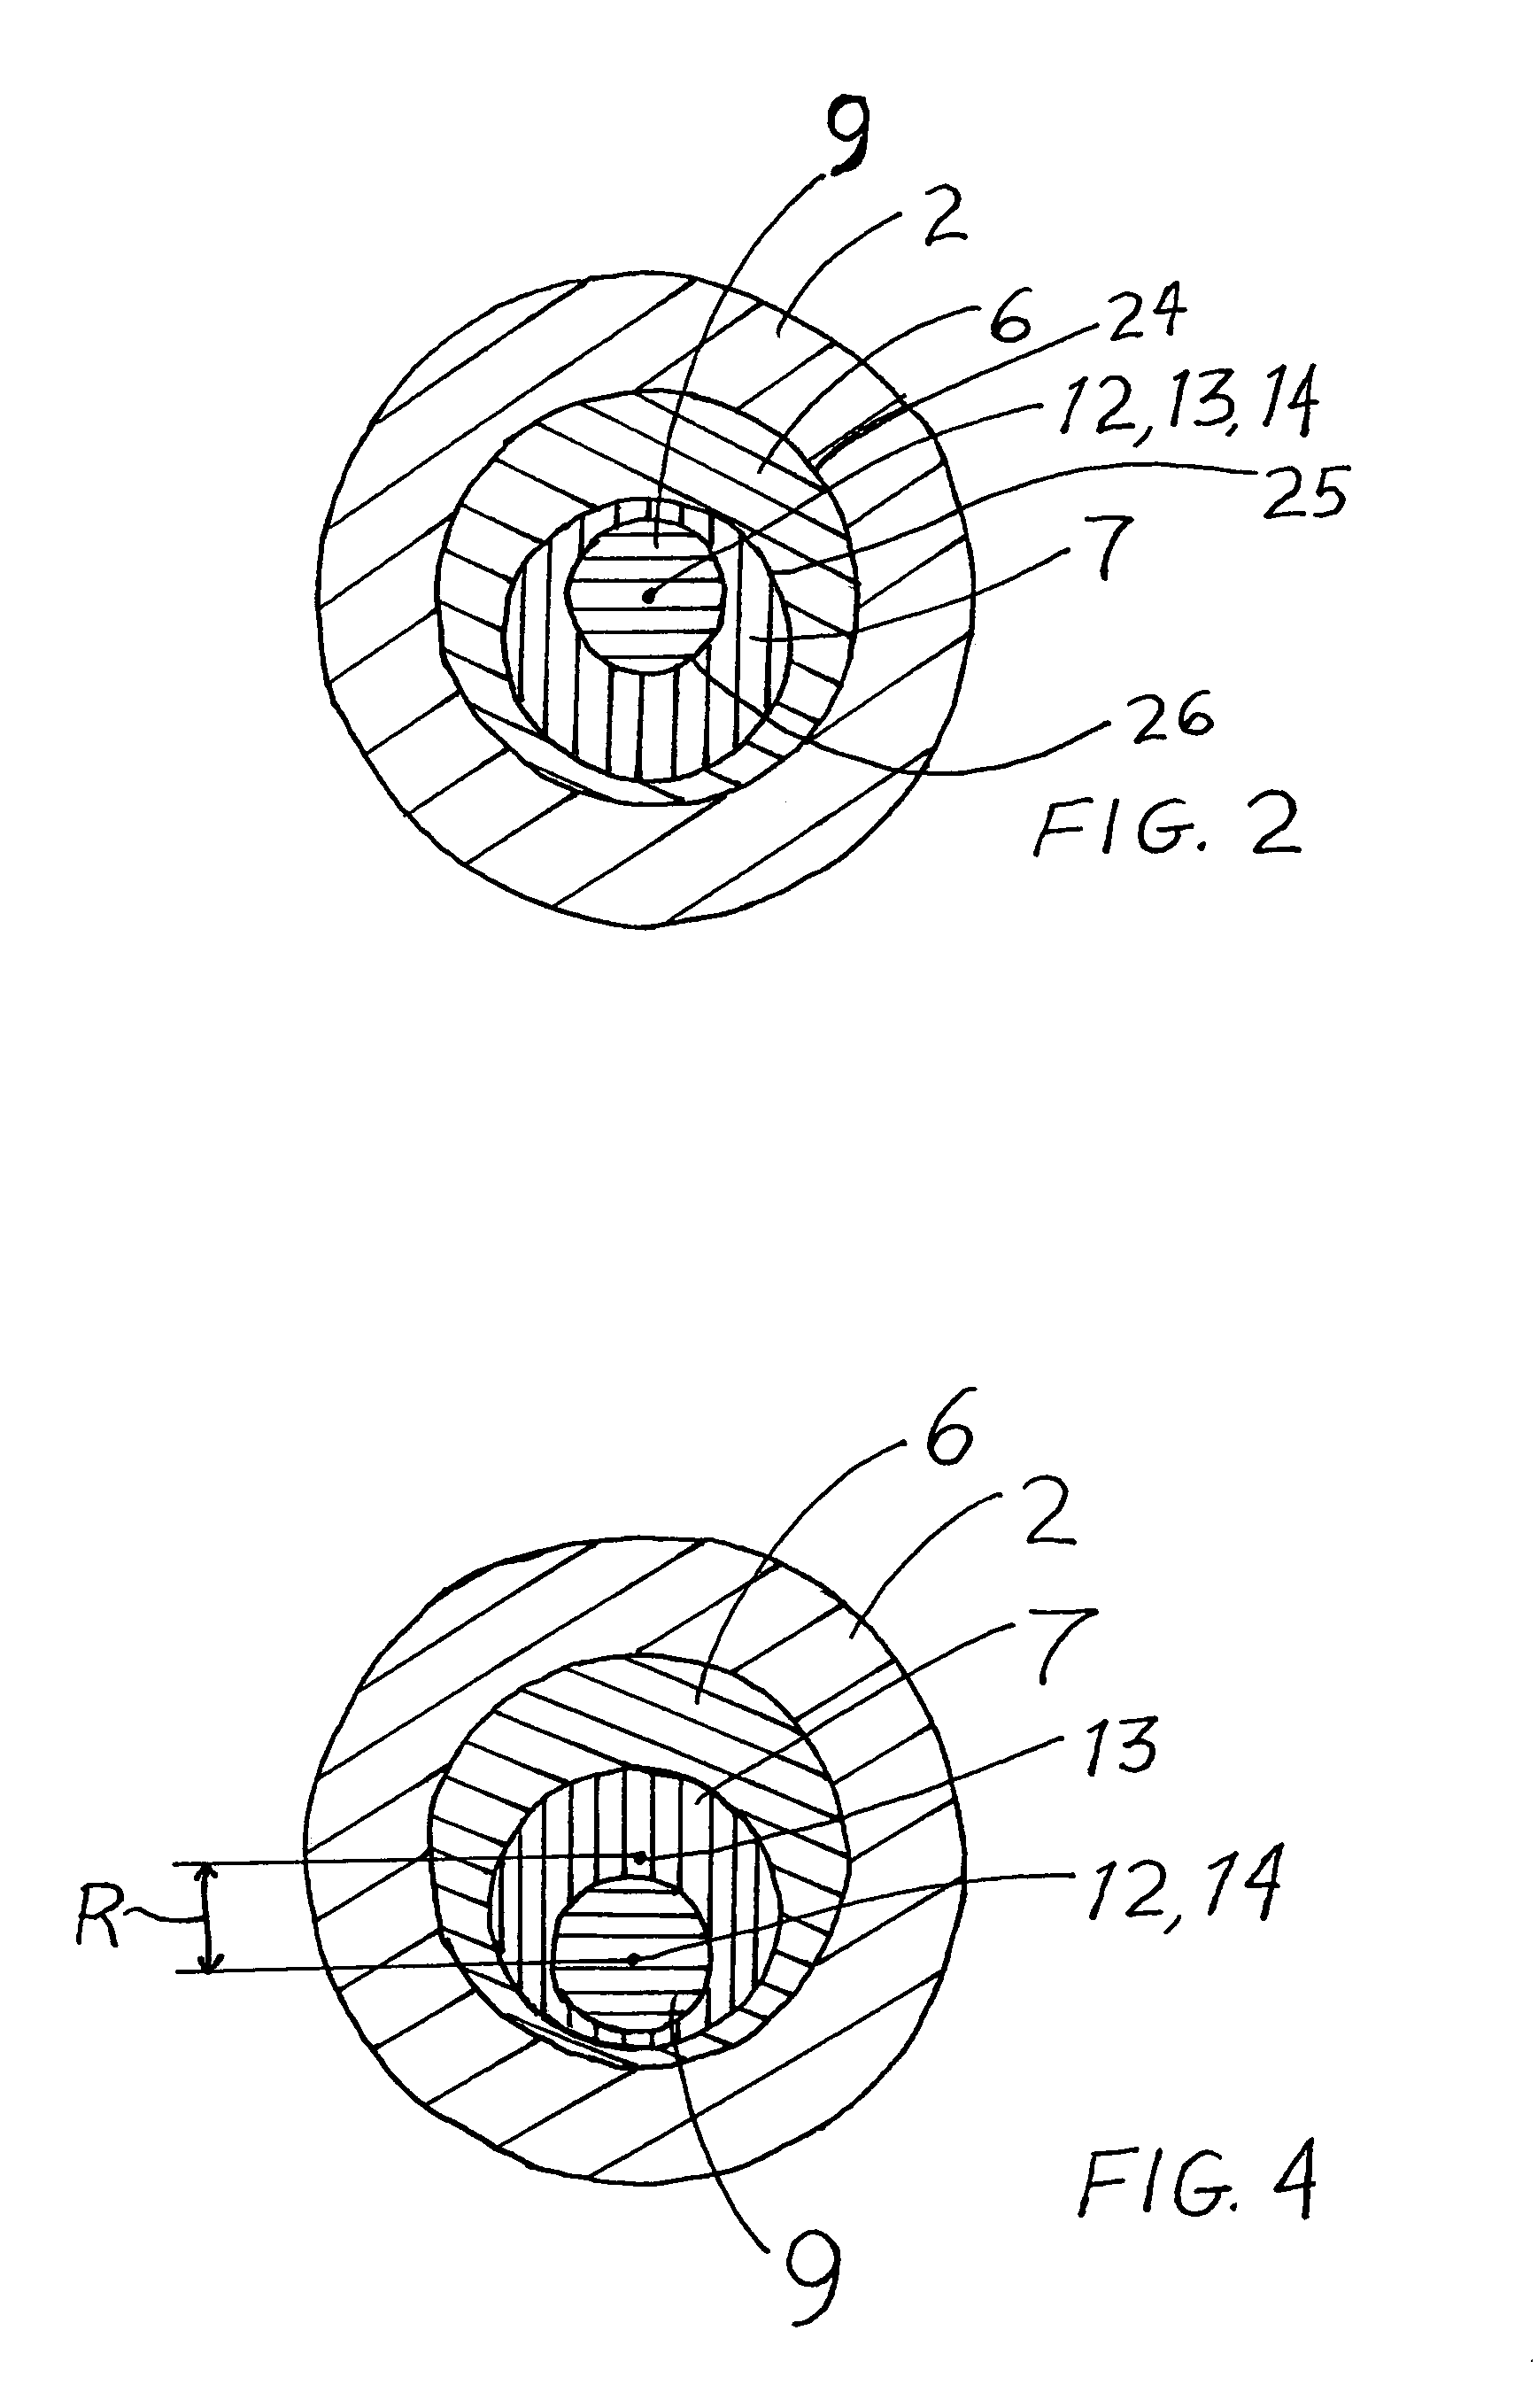 Bolted connection of two components with alignment compensation in three dimensions